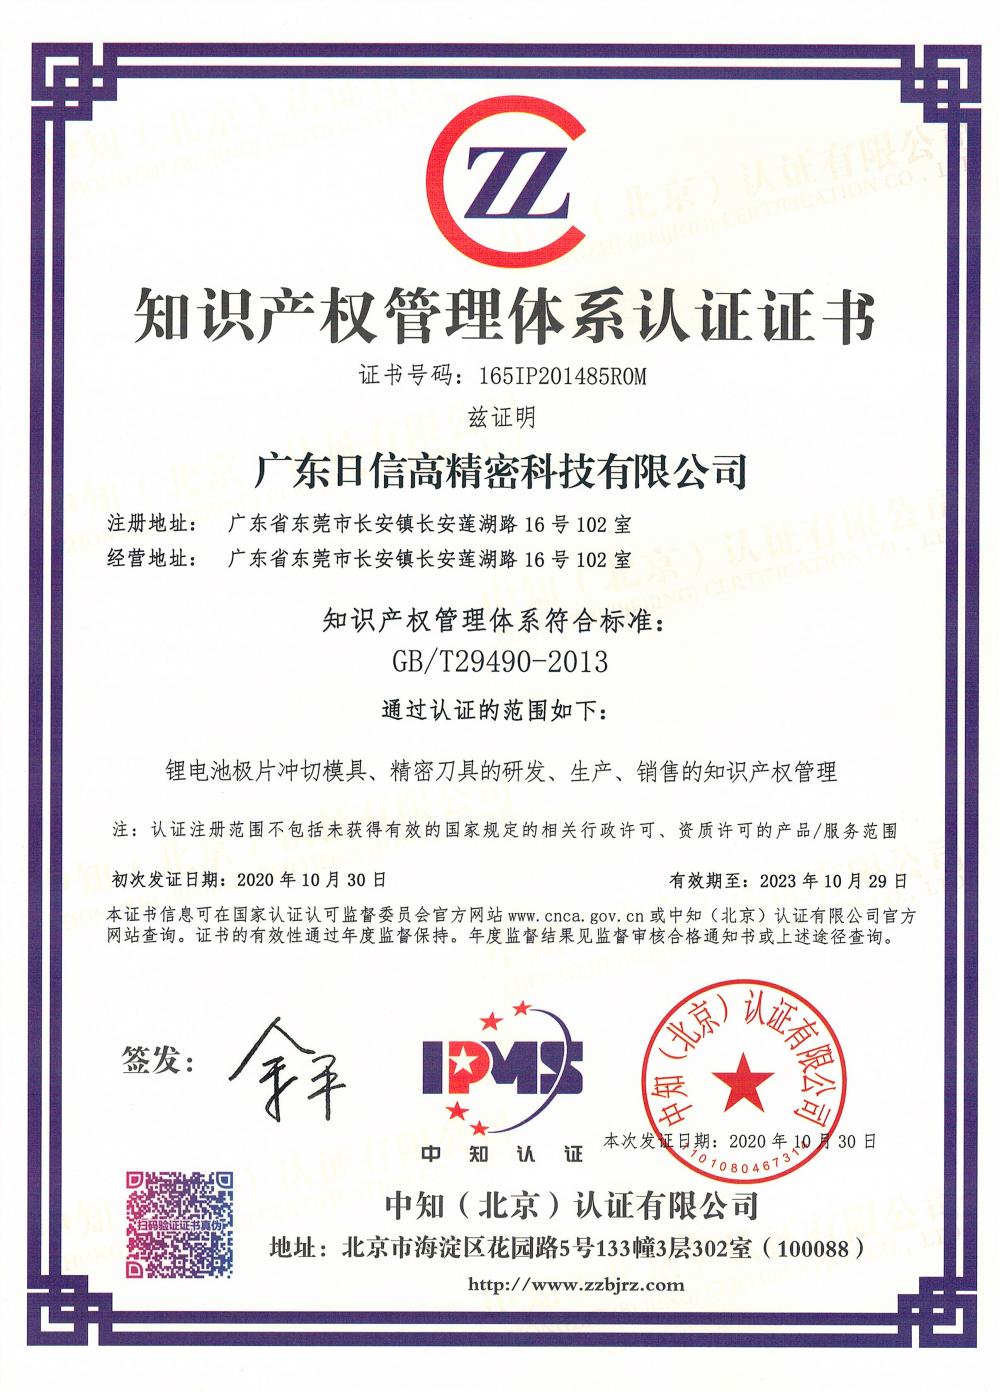 IP managment system certificate